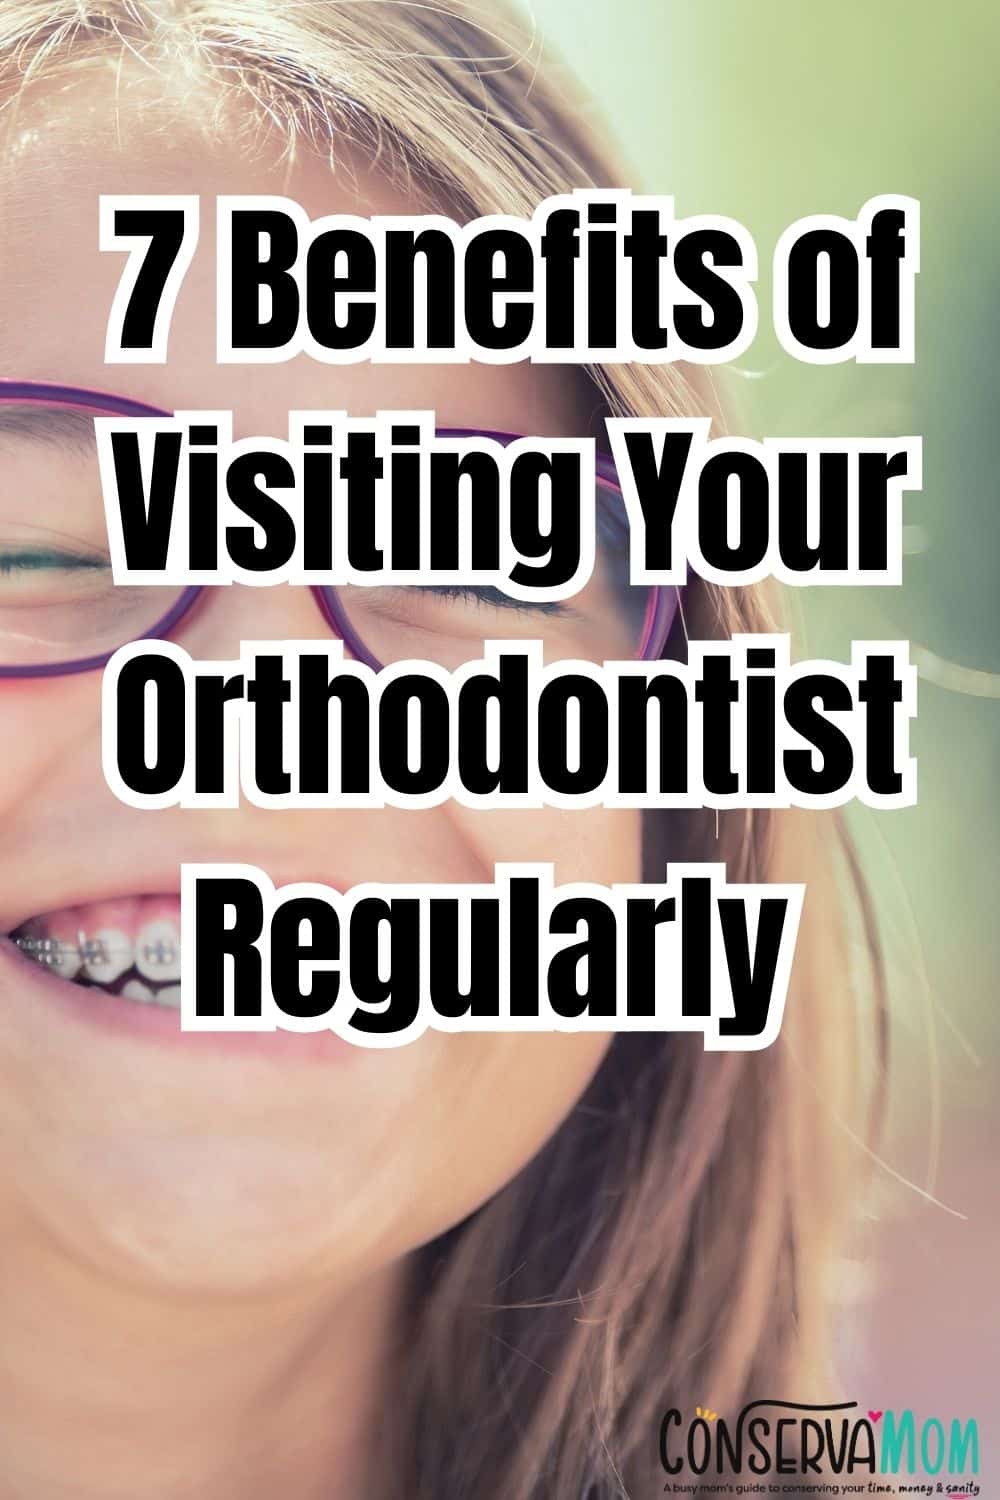 7 Benefits of Visiting Your Orthodontist Regularly